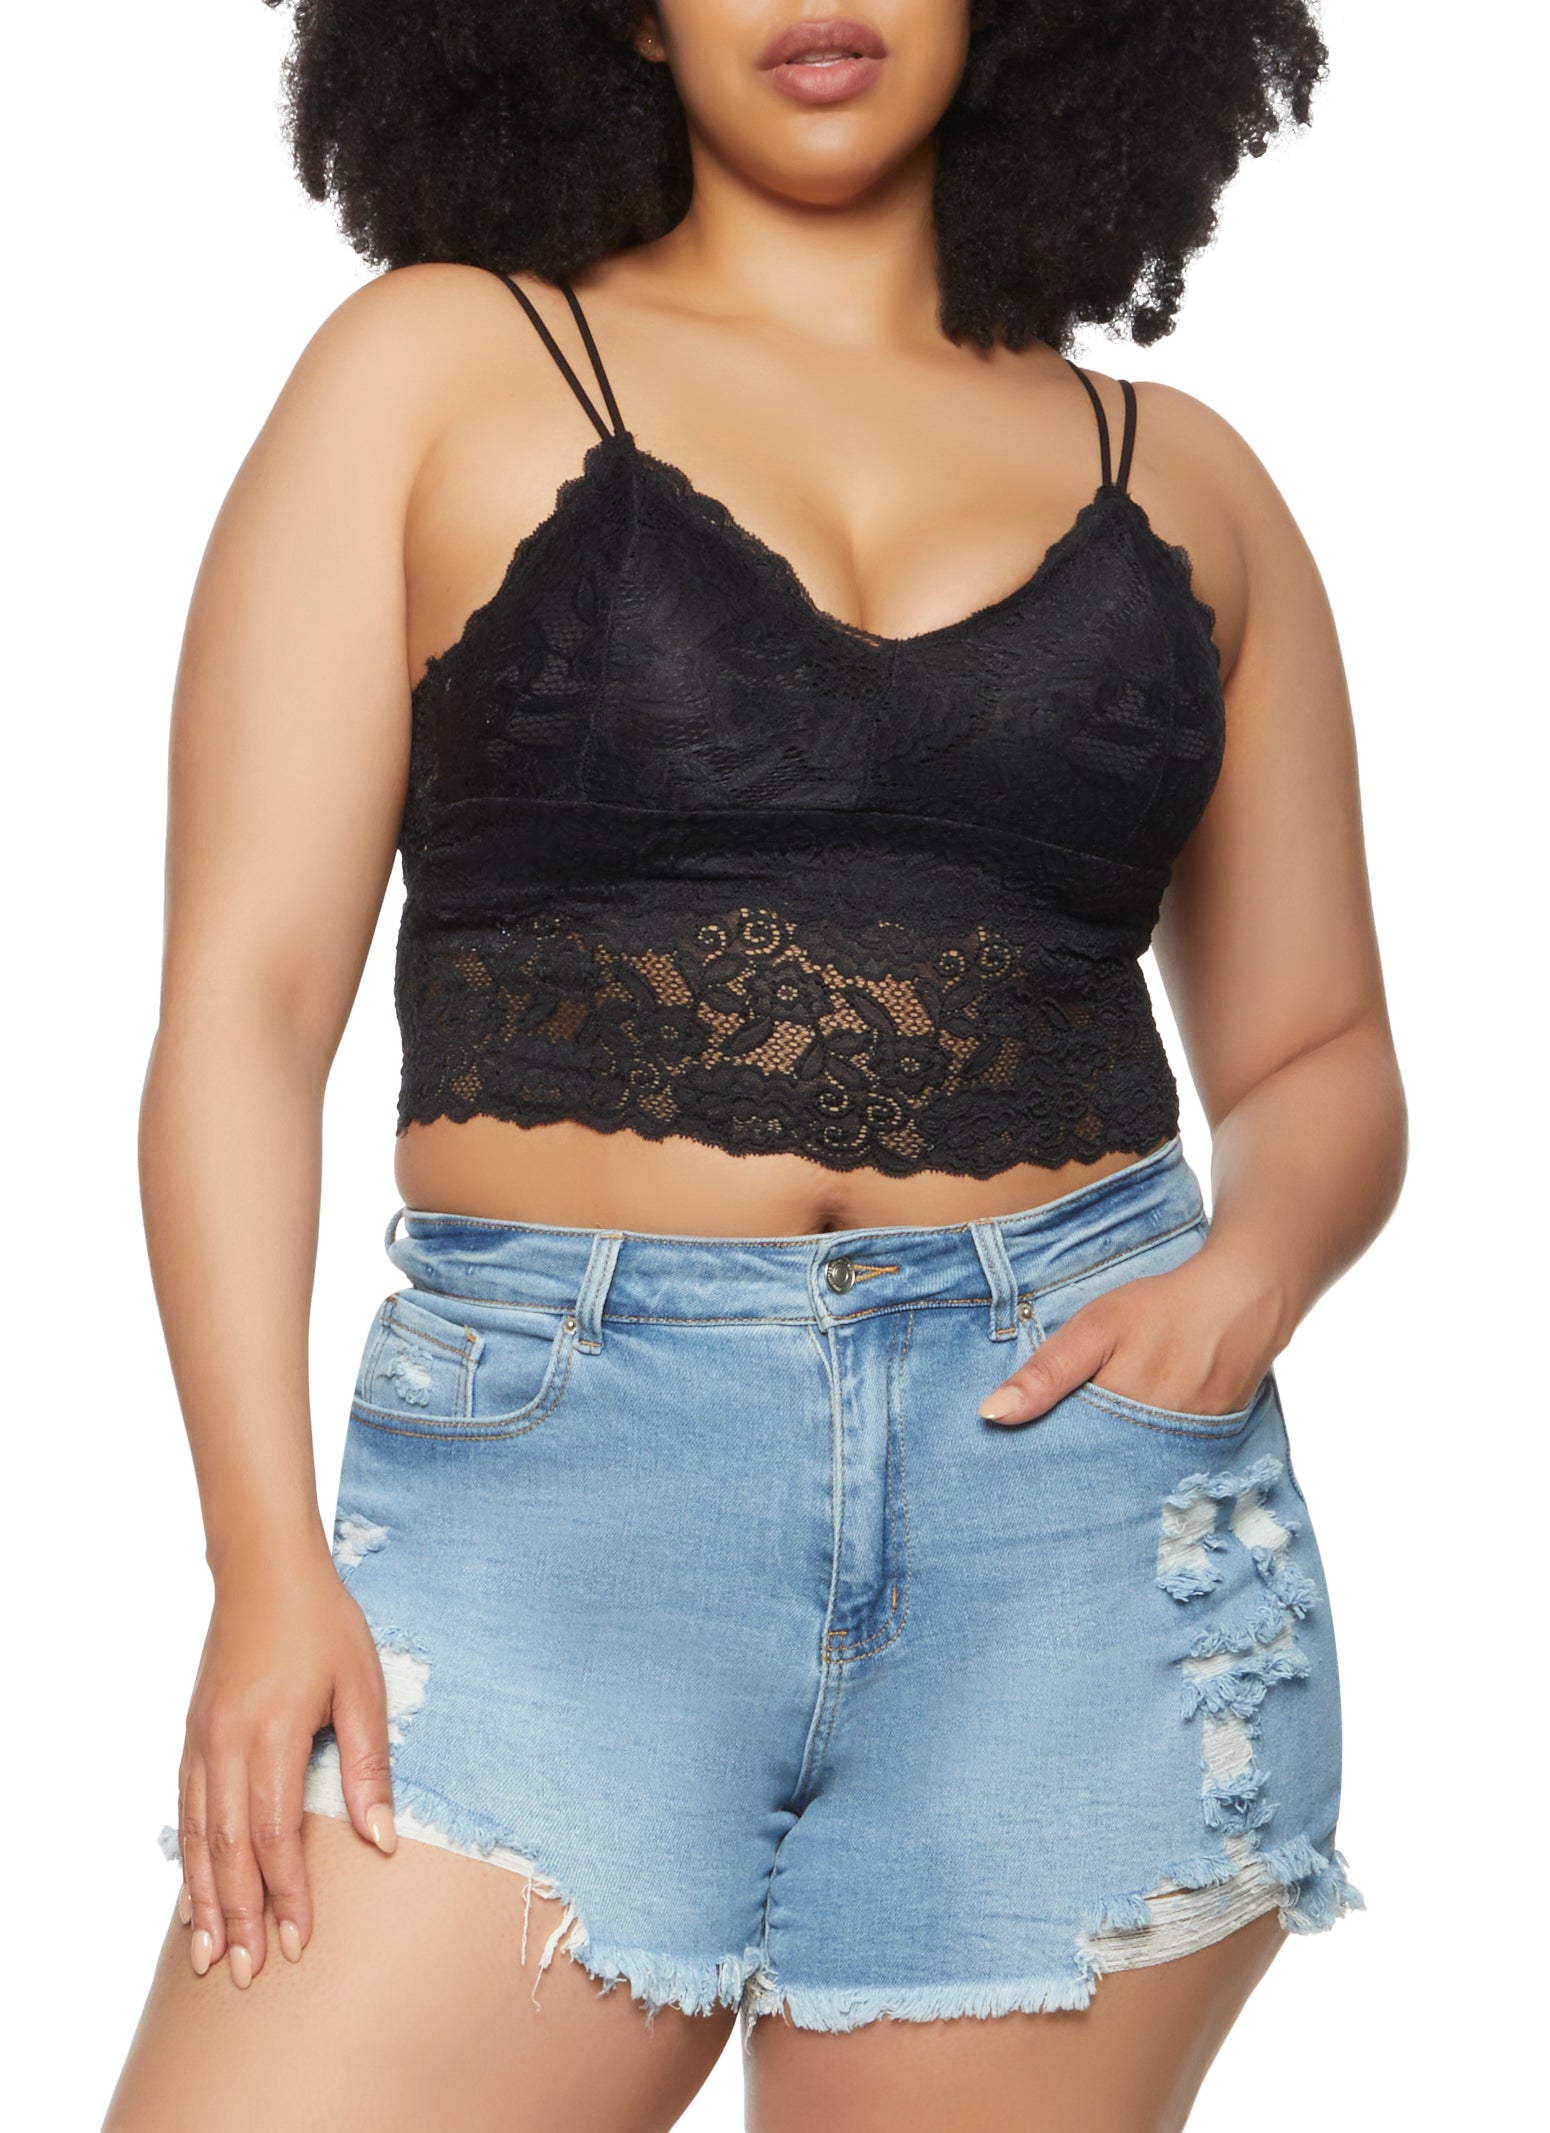 TUNUSKAT Lace Tank Tops for Women with Built in Bra Sexy Spaghetti